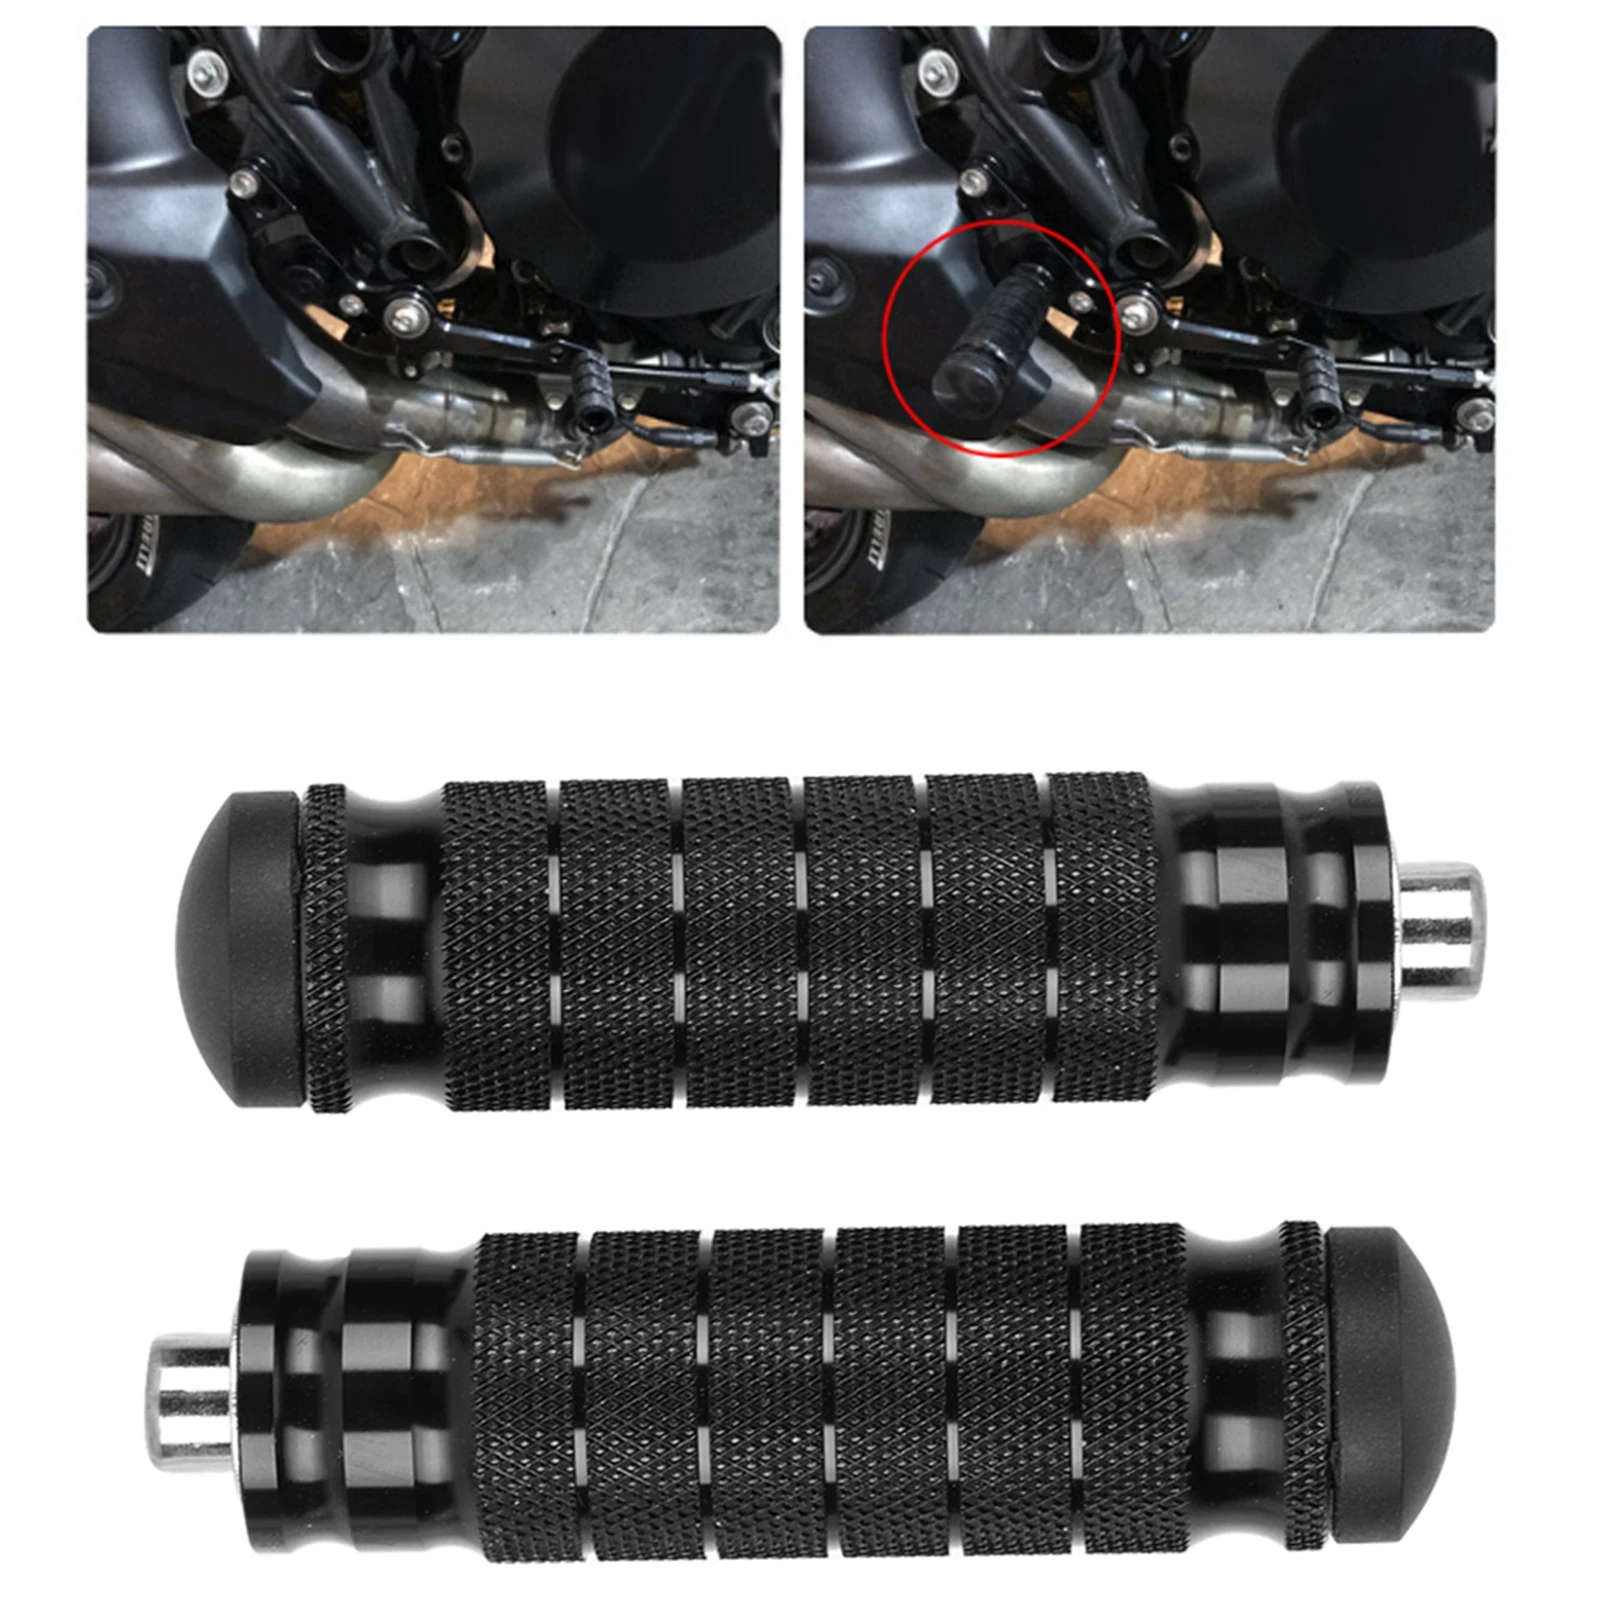 2pcs Motorcycle Rear Footrests Universal M8 Non Slip Foot Rest Pegs Pedals - $20.93